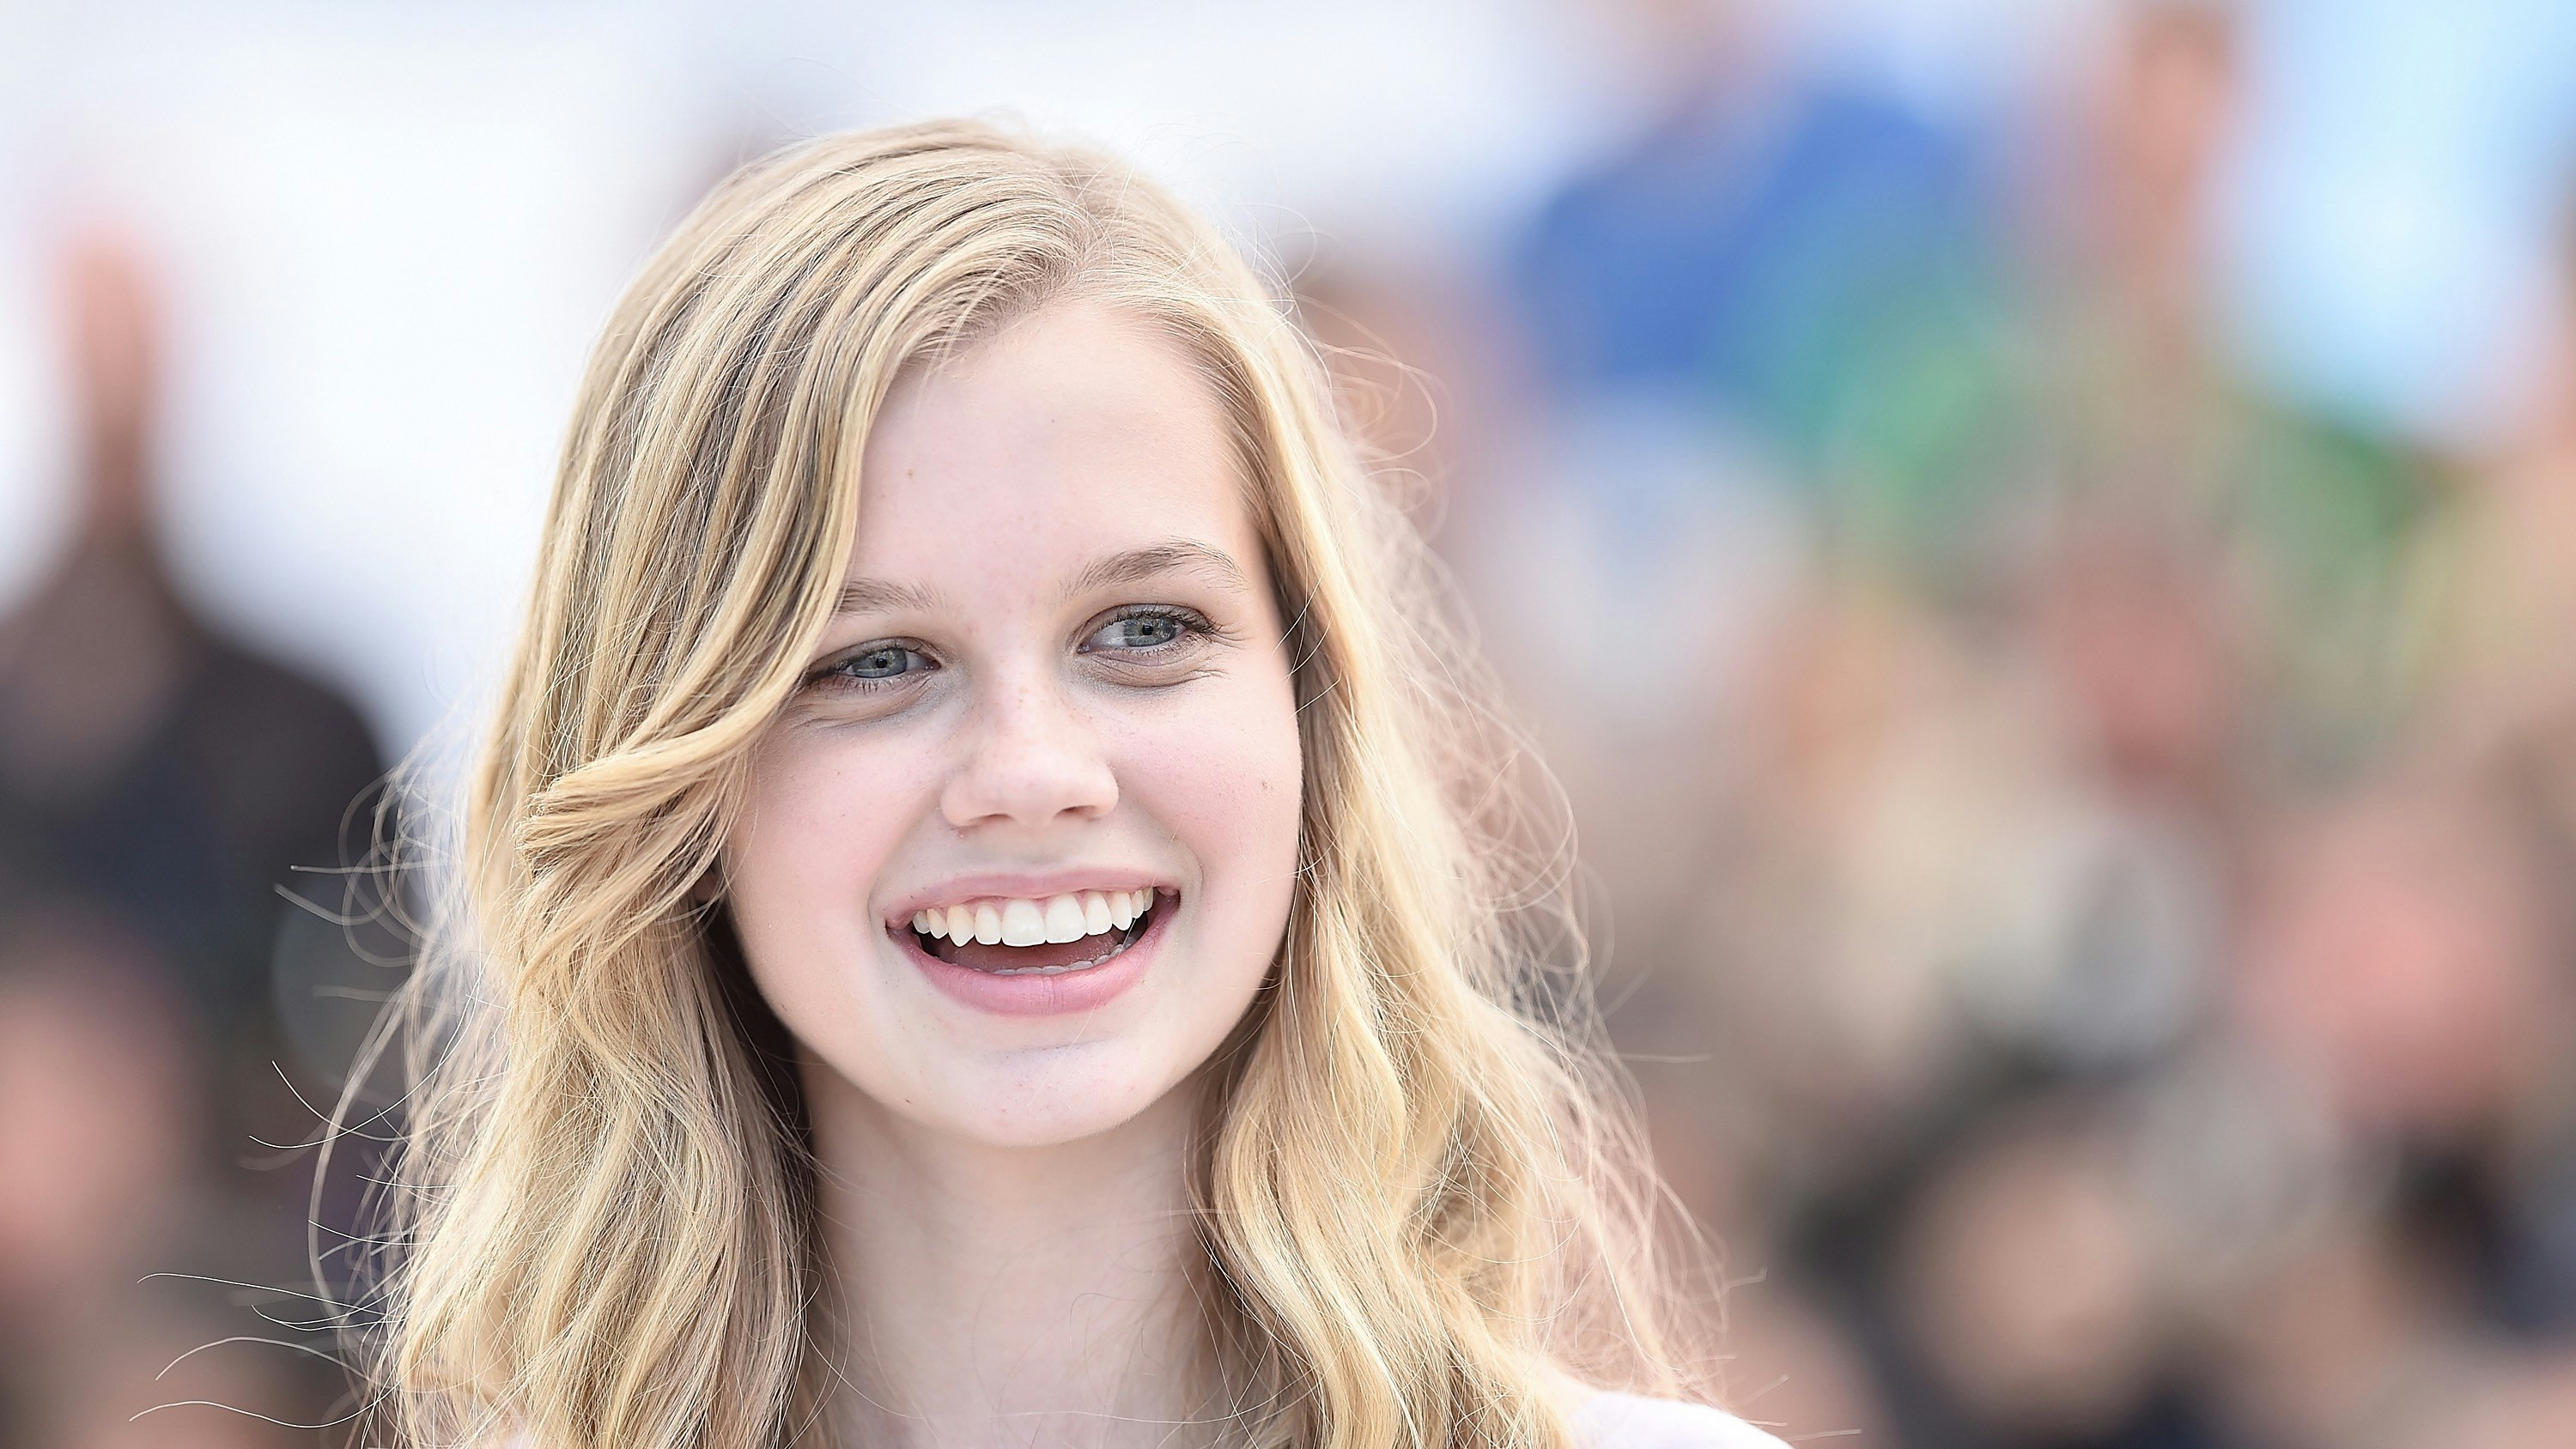 The Nice Guys’ Angourie Rice heads for The Beguiled | Movies ...